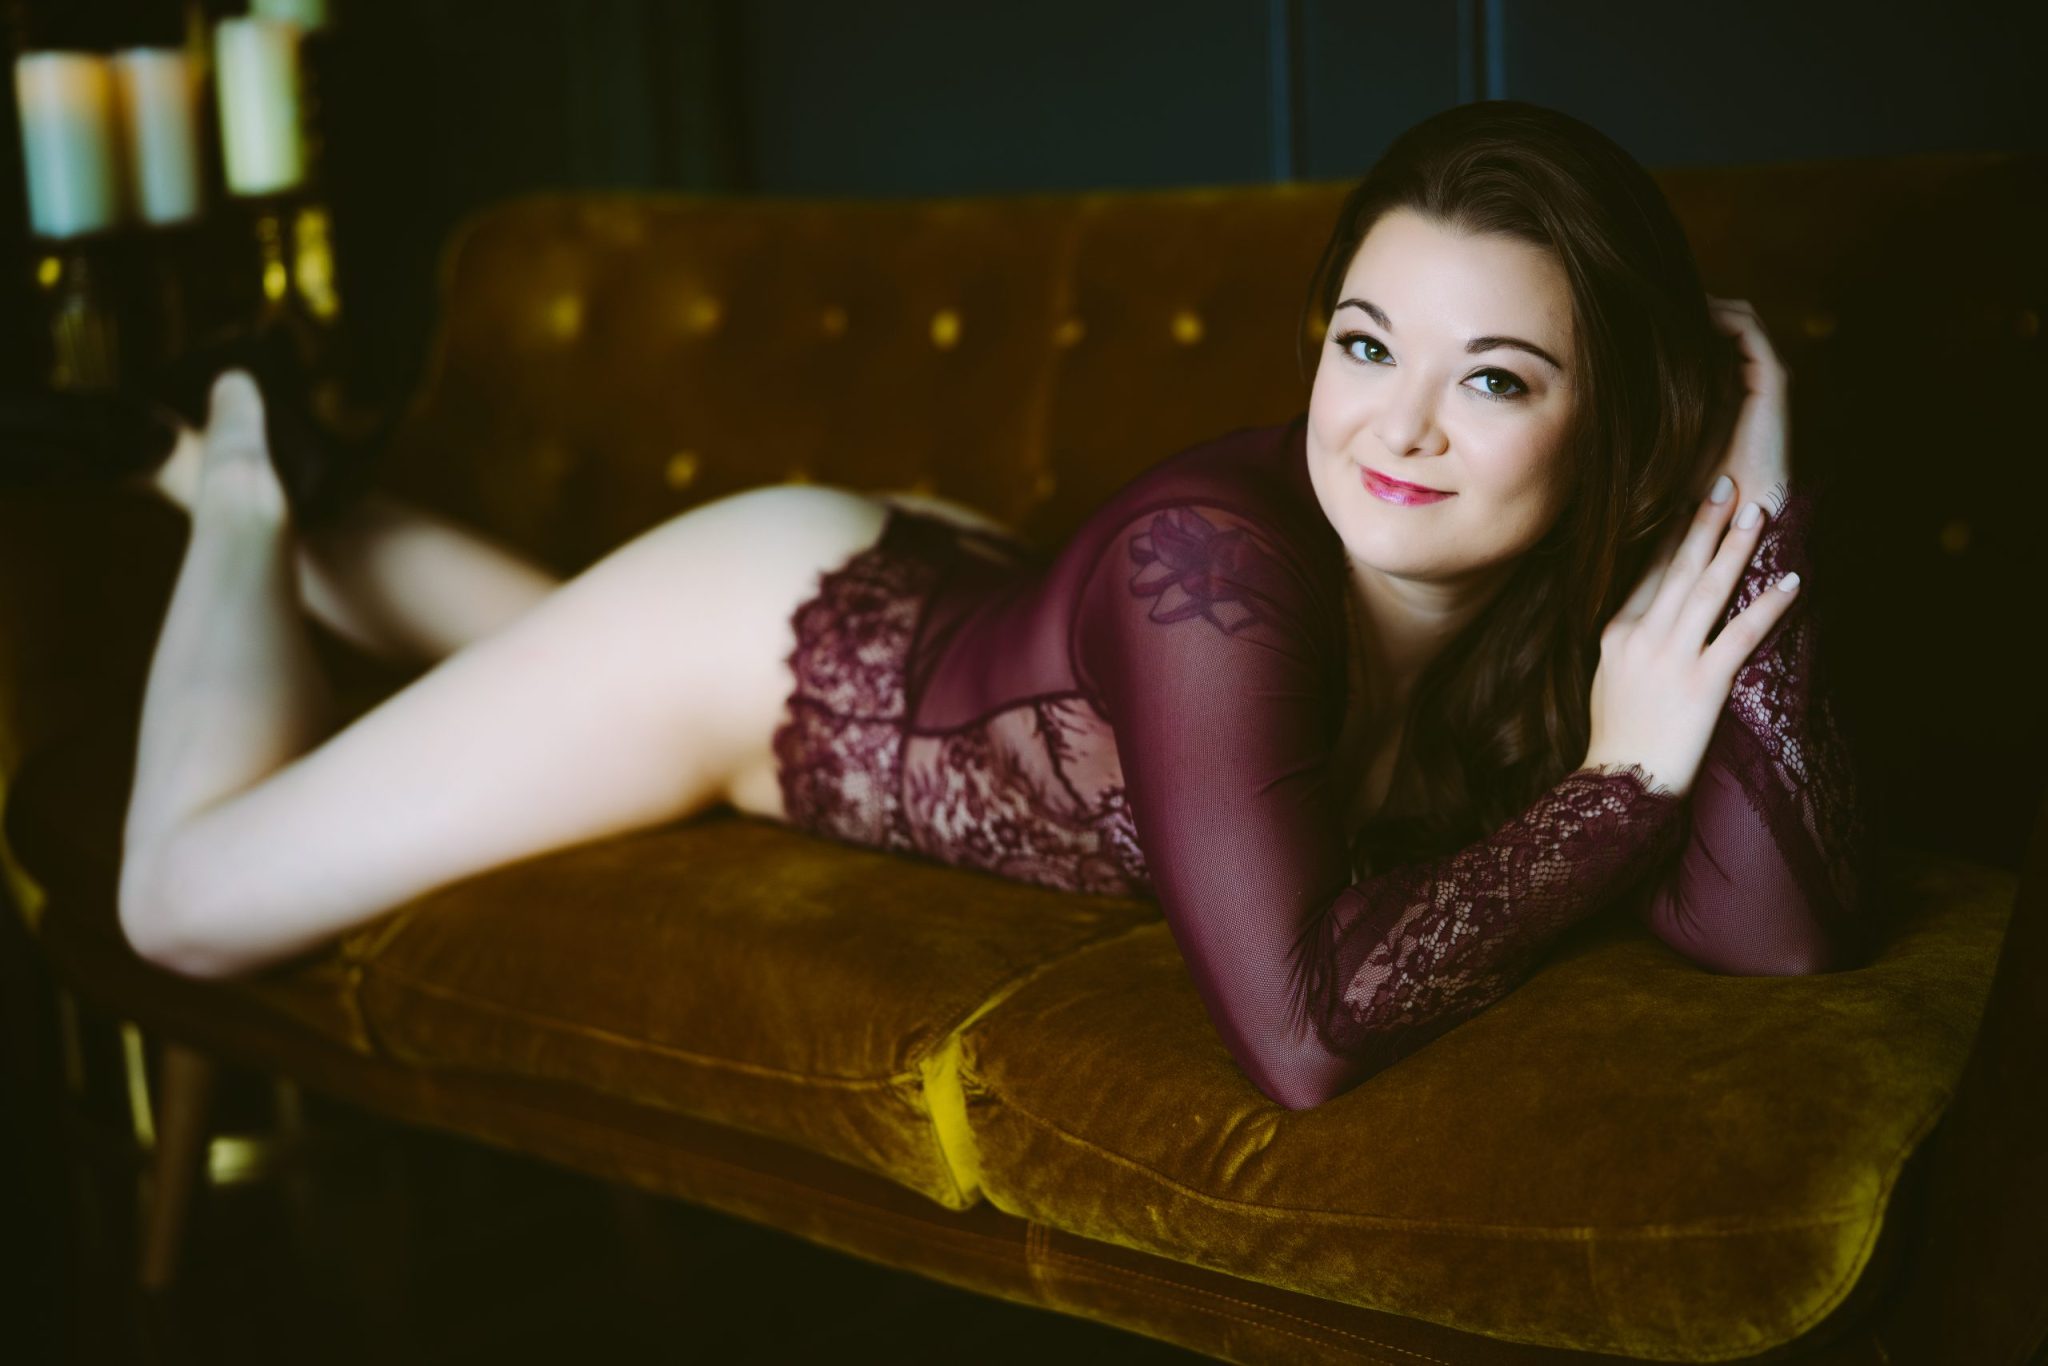 A woman lounging on a couch in lace lingerie for Northern Virginia Boudoir Photography.